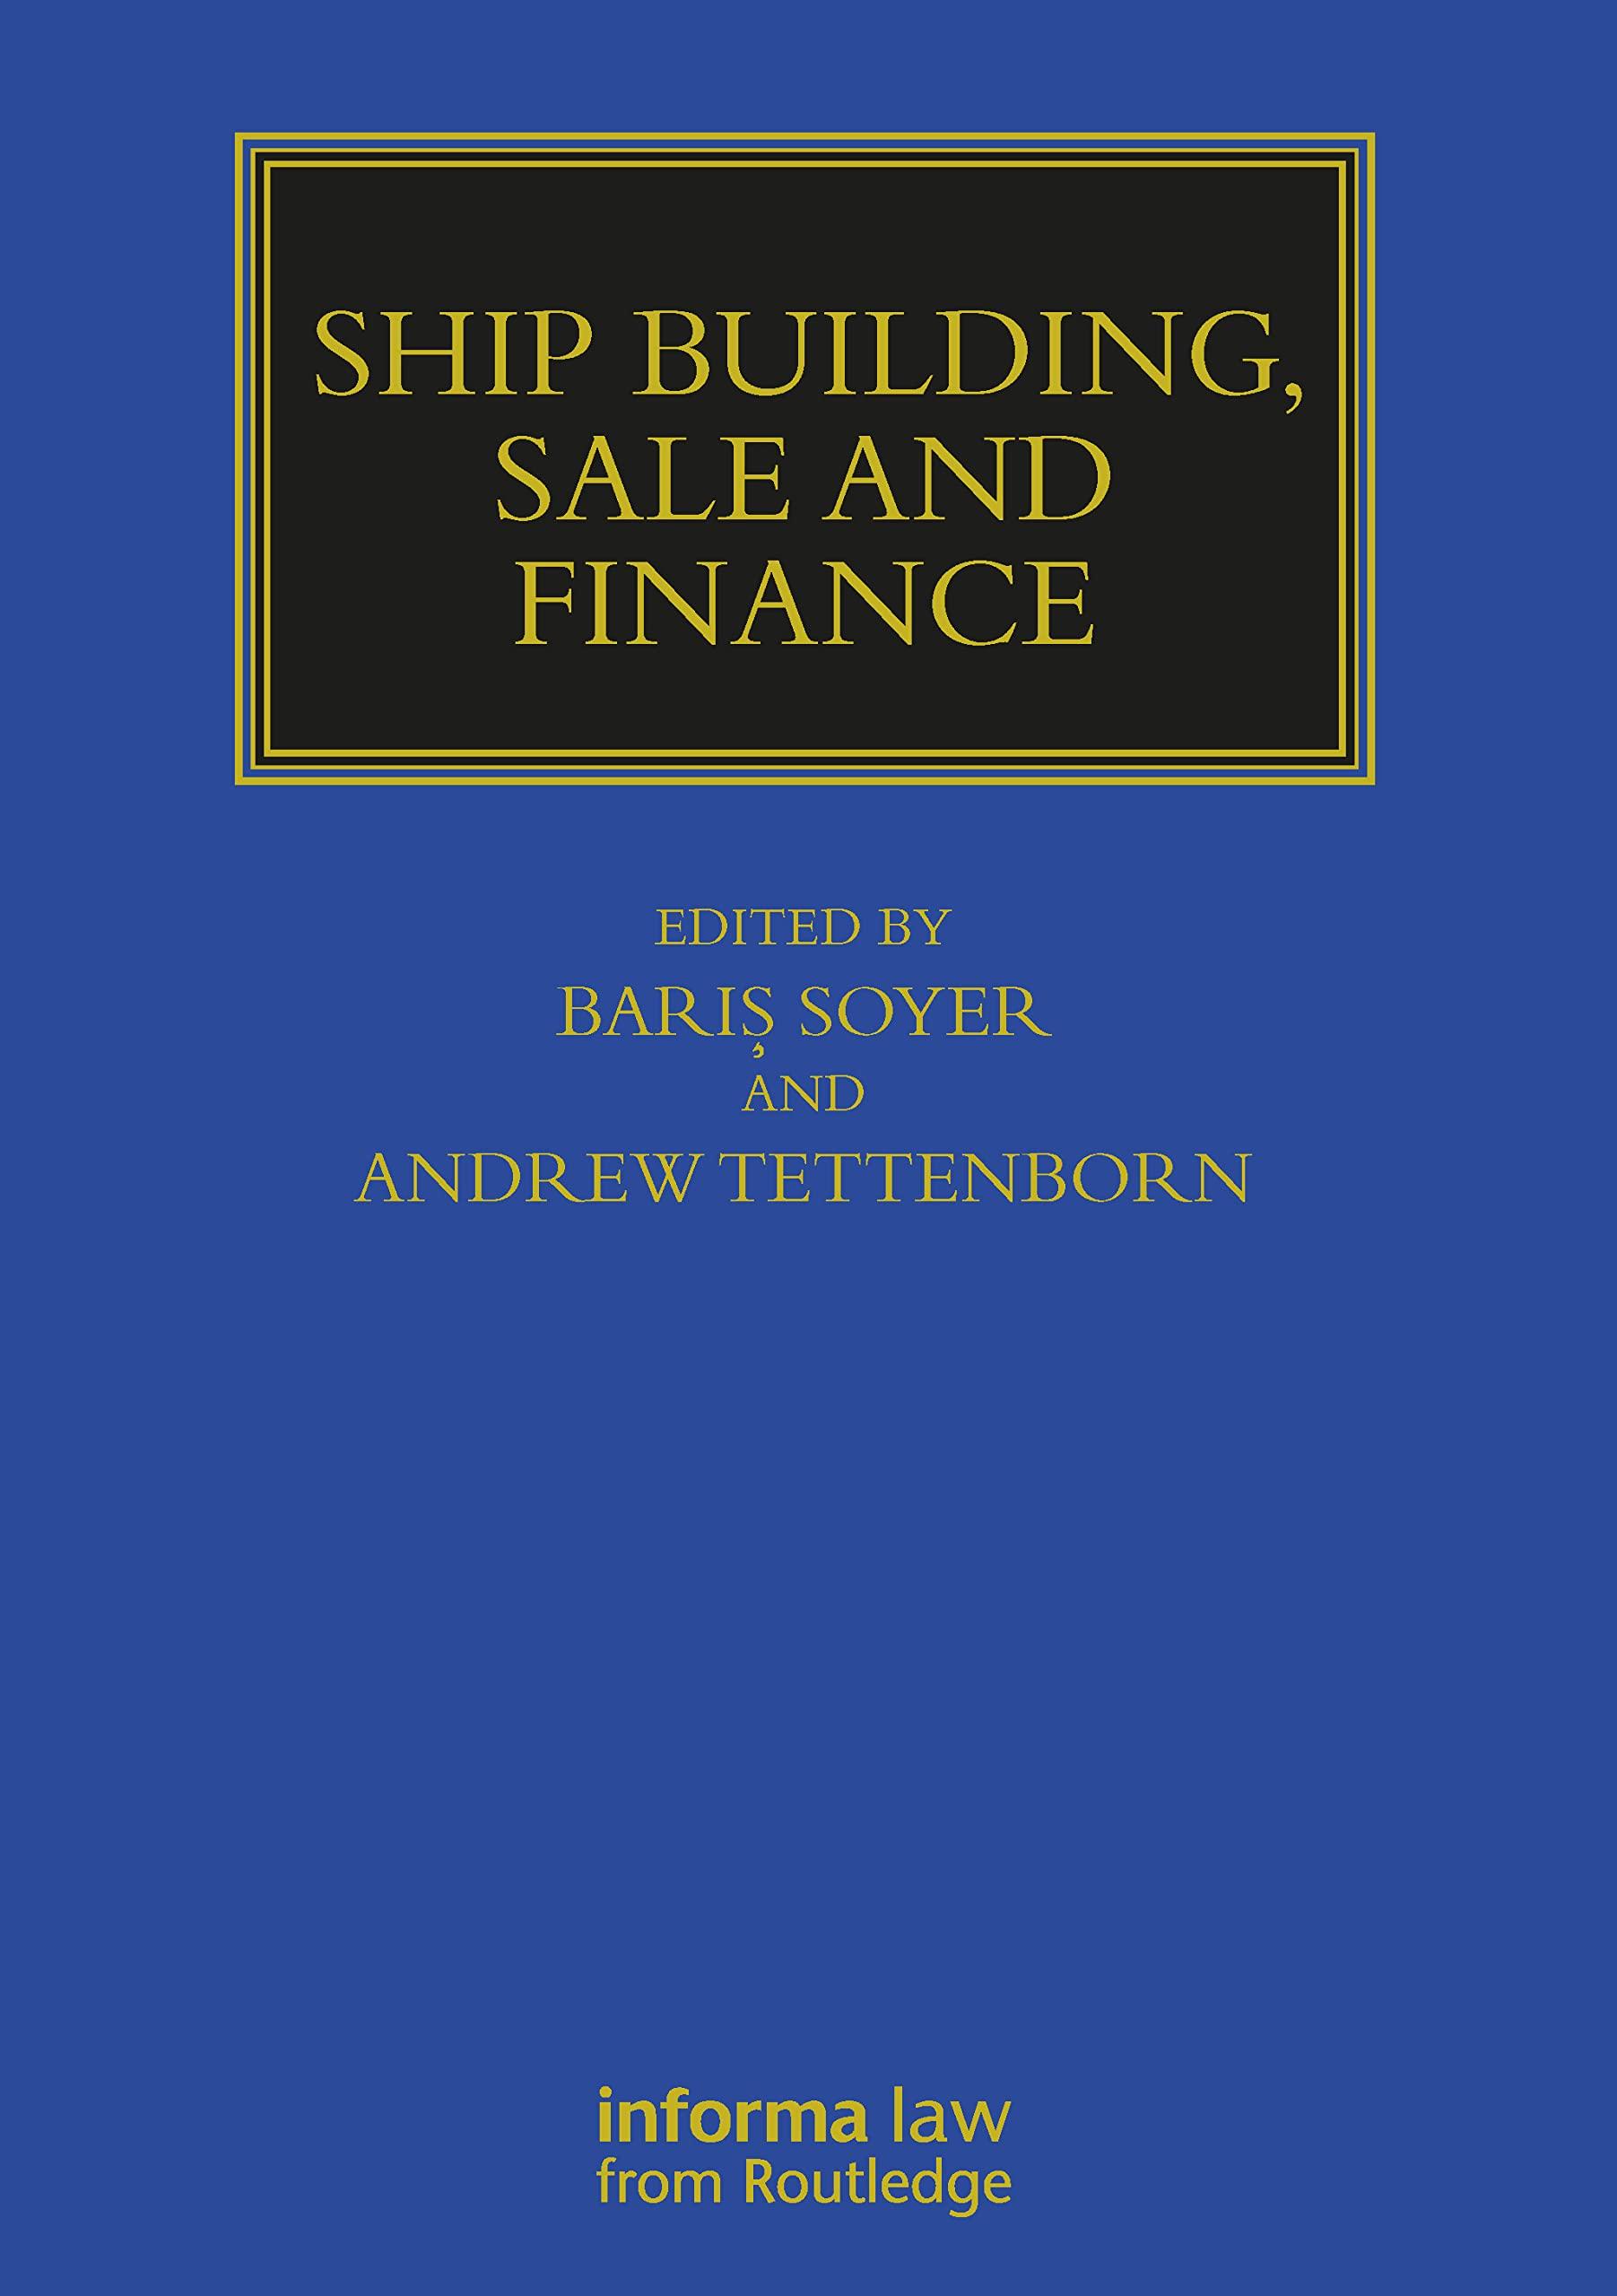 ship building sale and finance 1st edition baris soyer, andrew tettenborn 1032179678, 978-1032179674